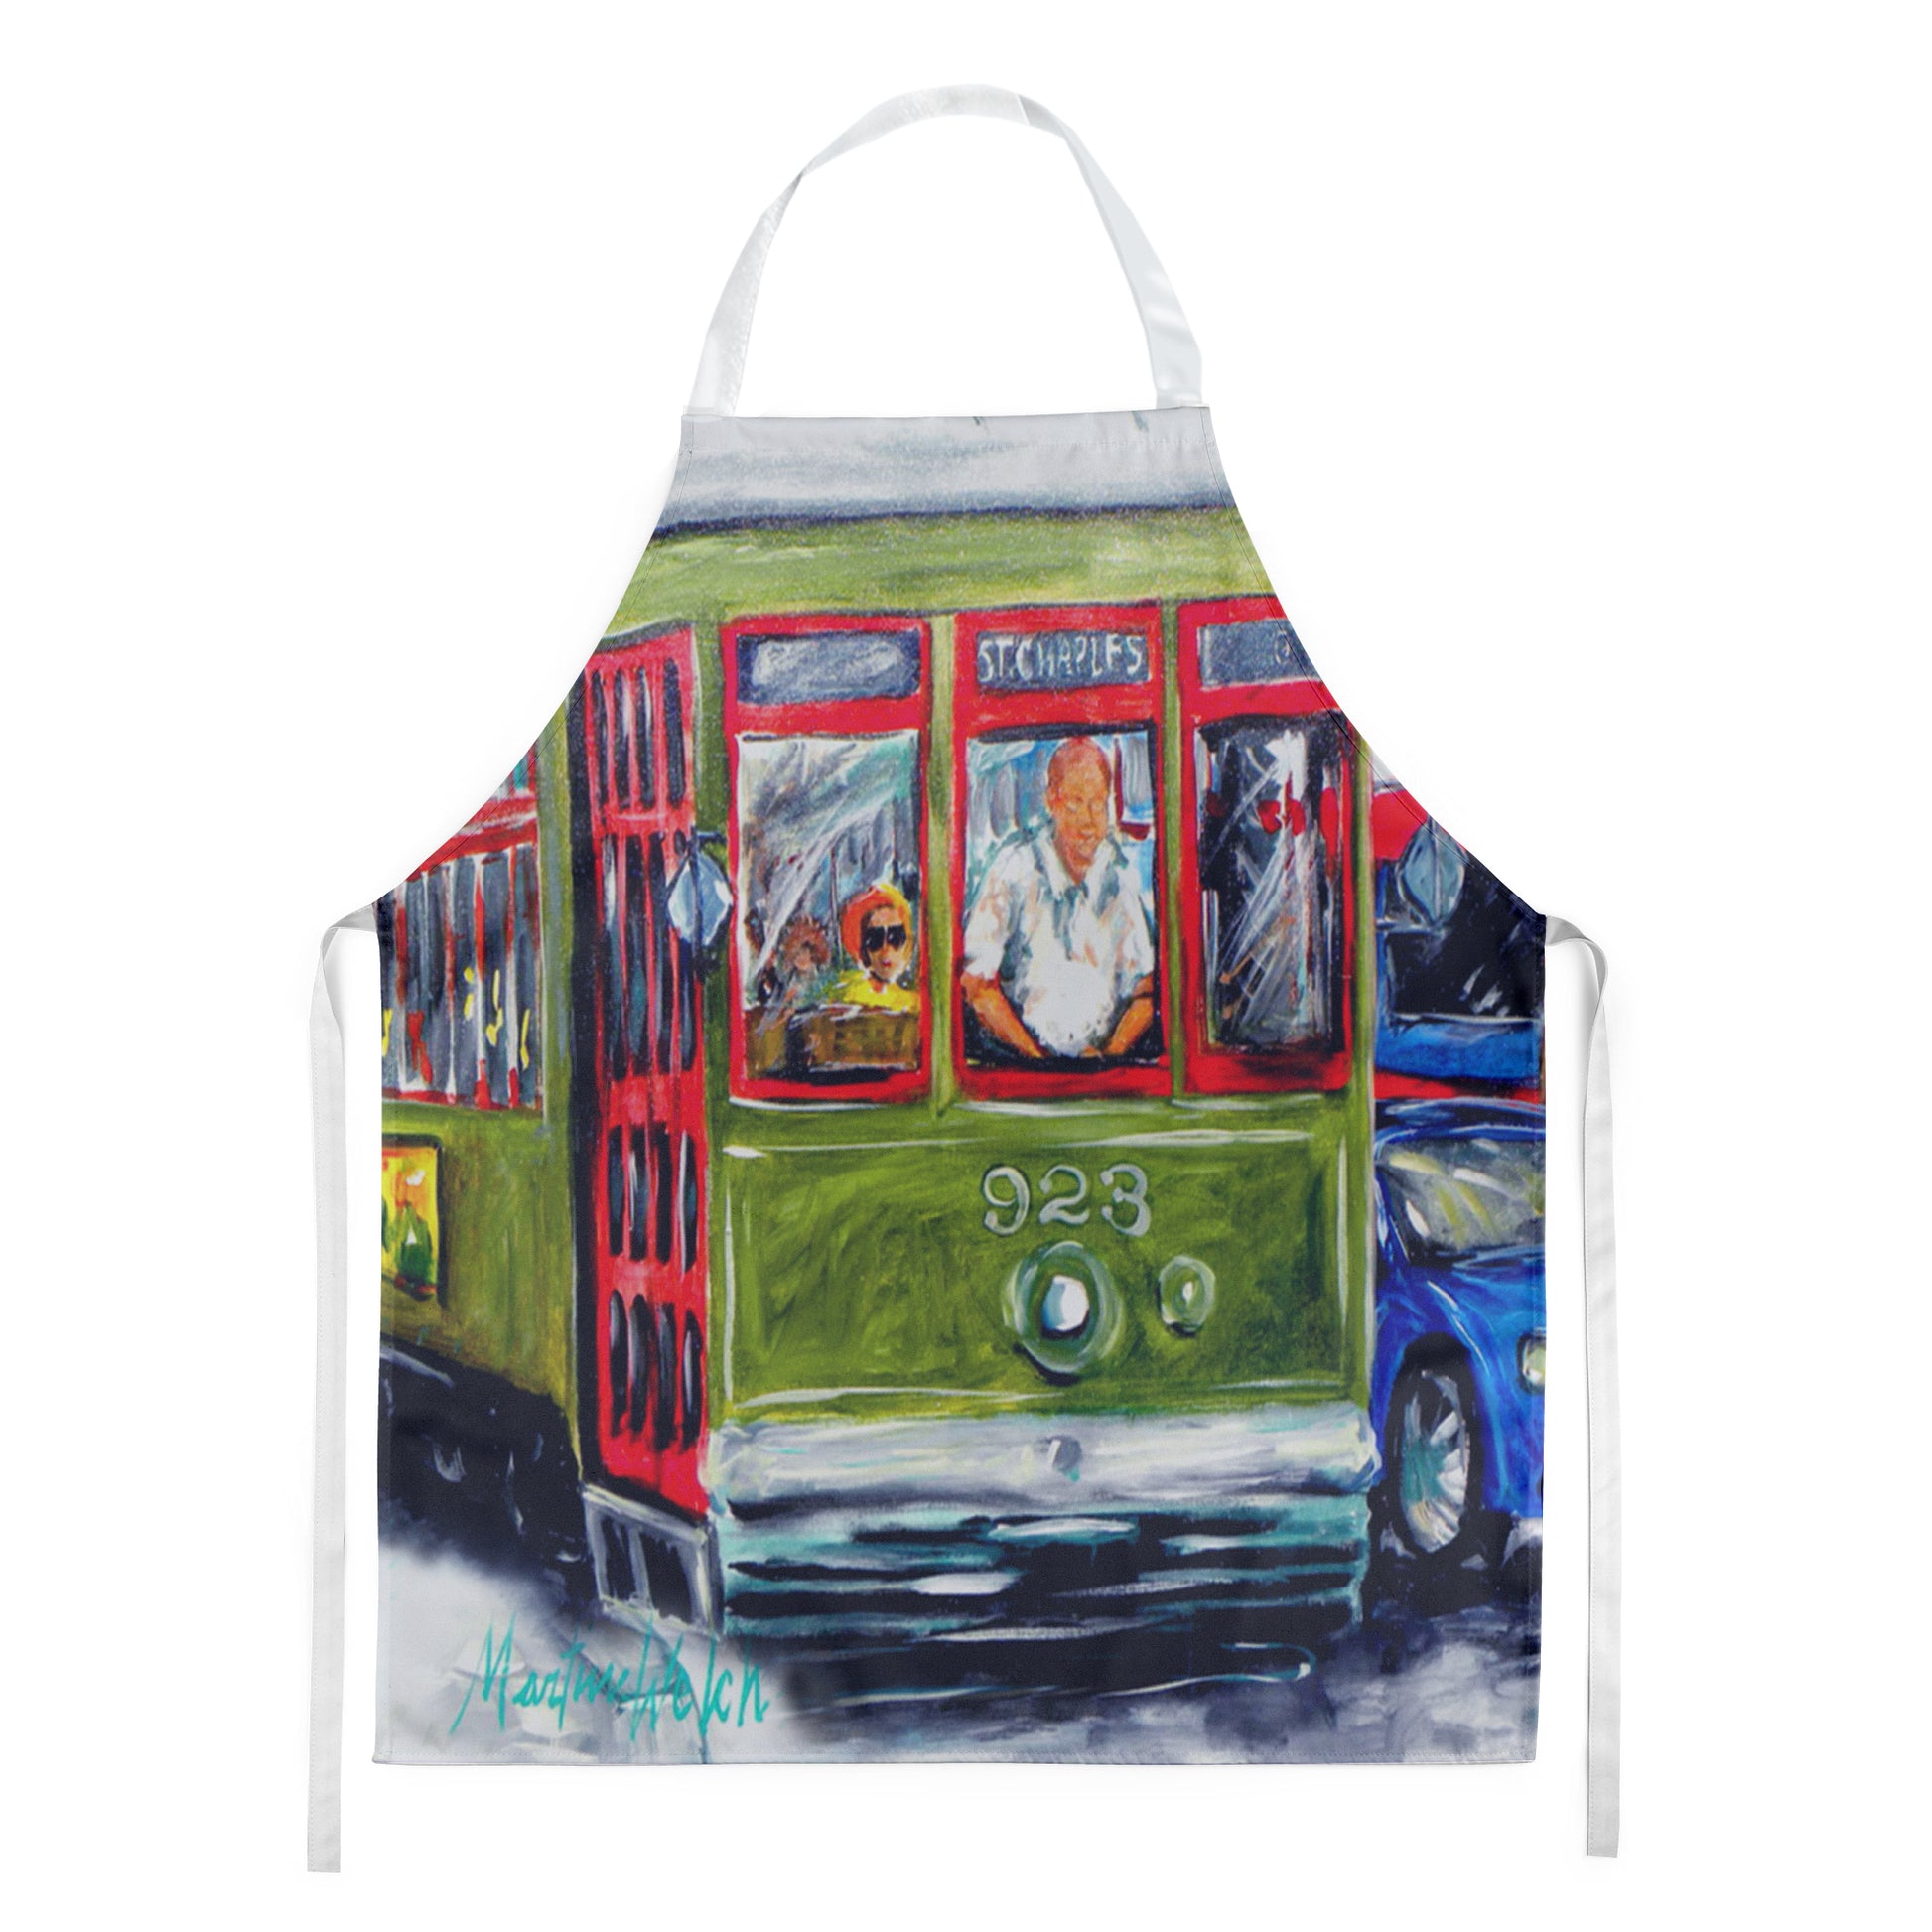 Buy this New Orleans Streetcar Apron